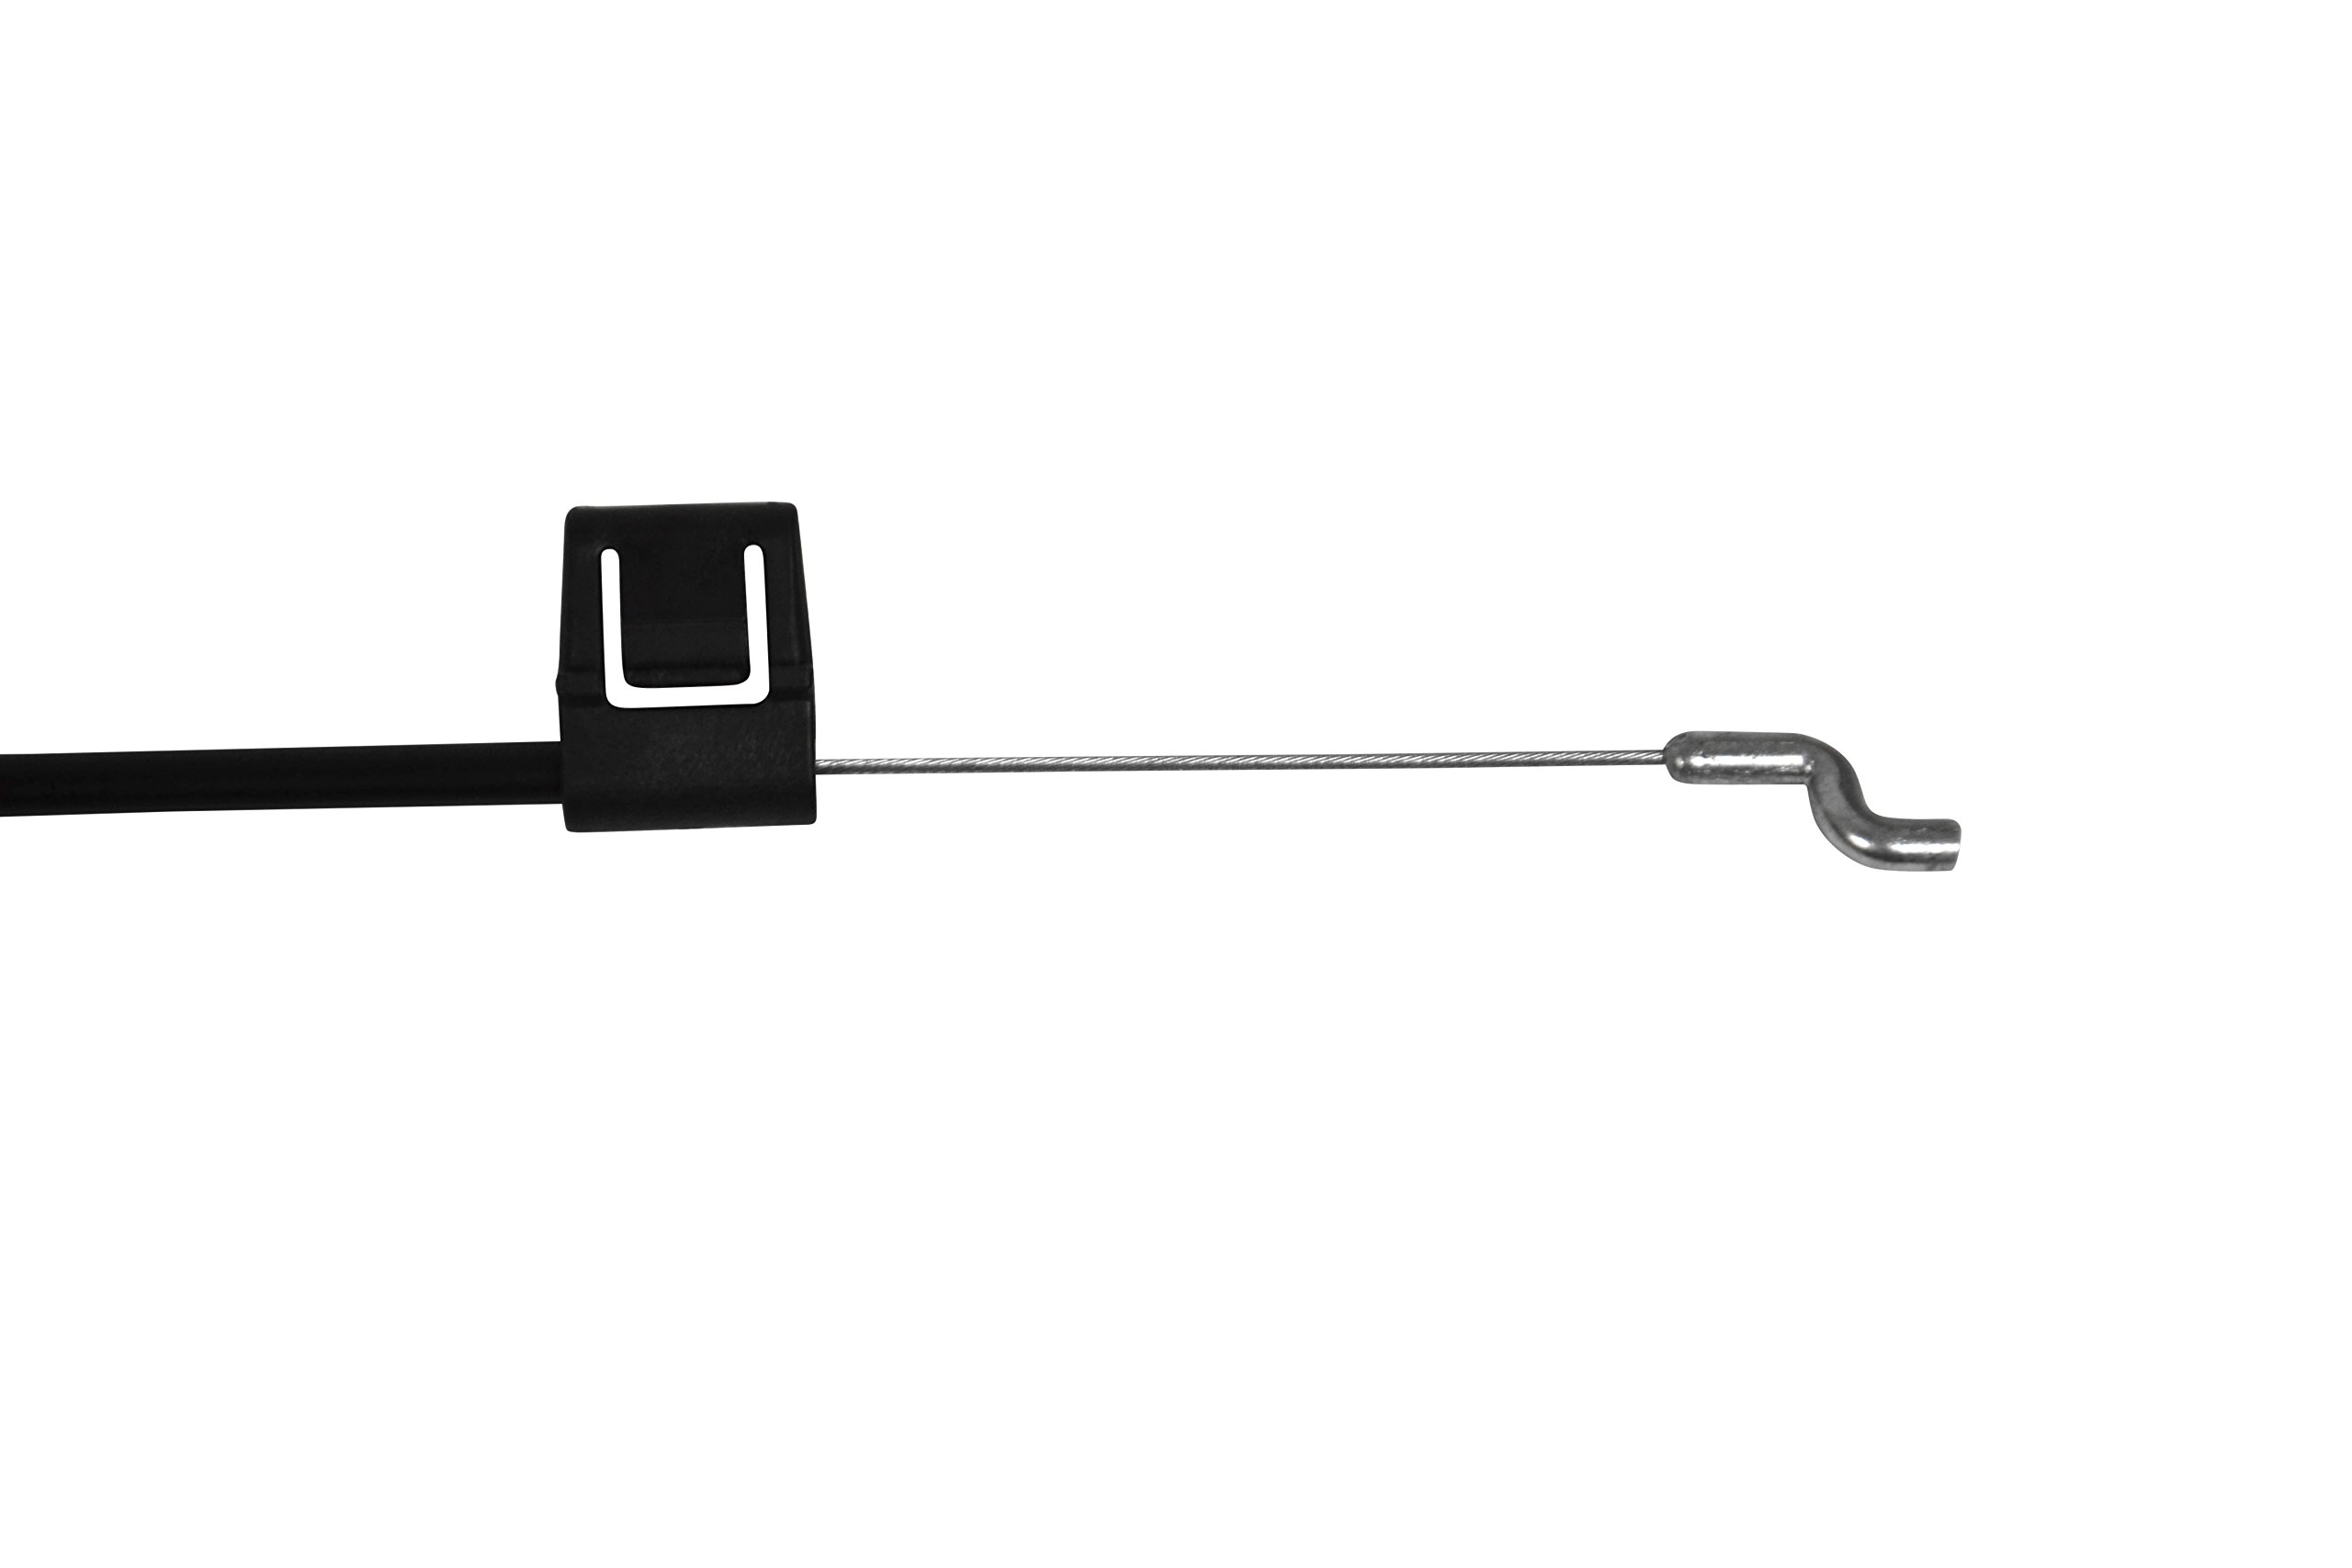 Recliner-Handles Cable with 3.5" Exposed Wire and 3mm Barrel. 31.75" Total Length with an S-tip.